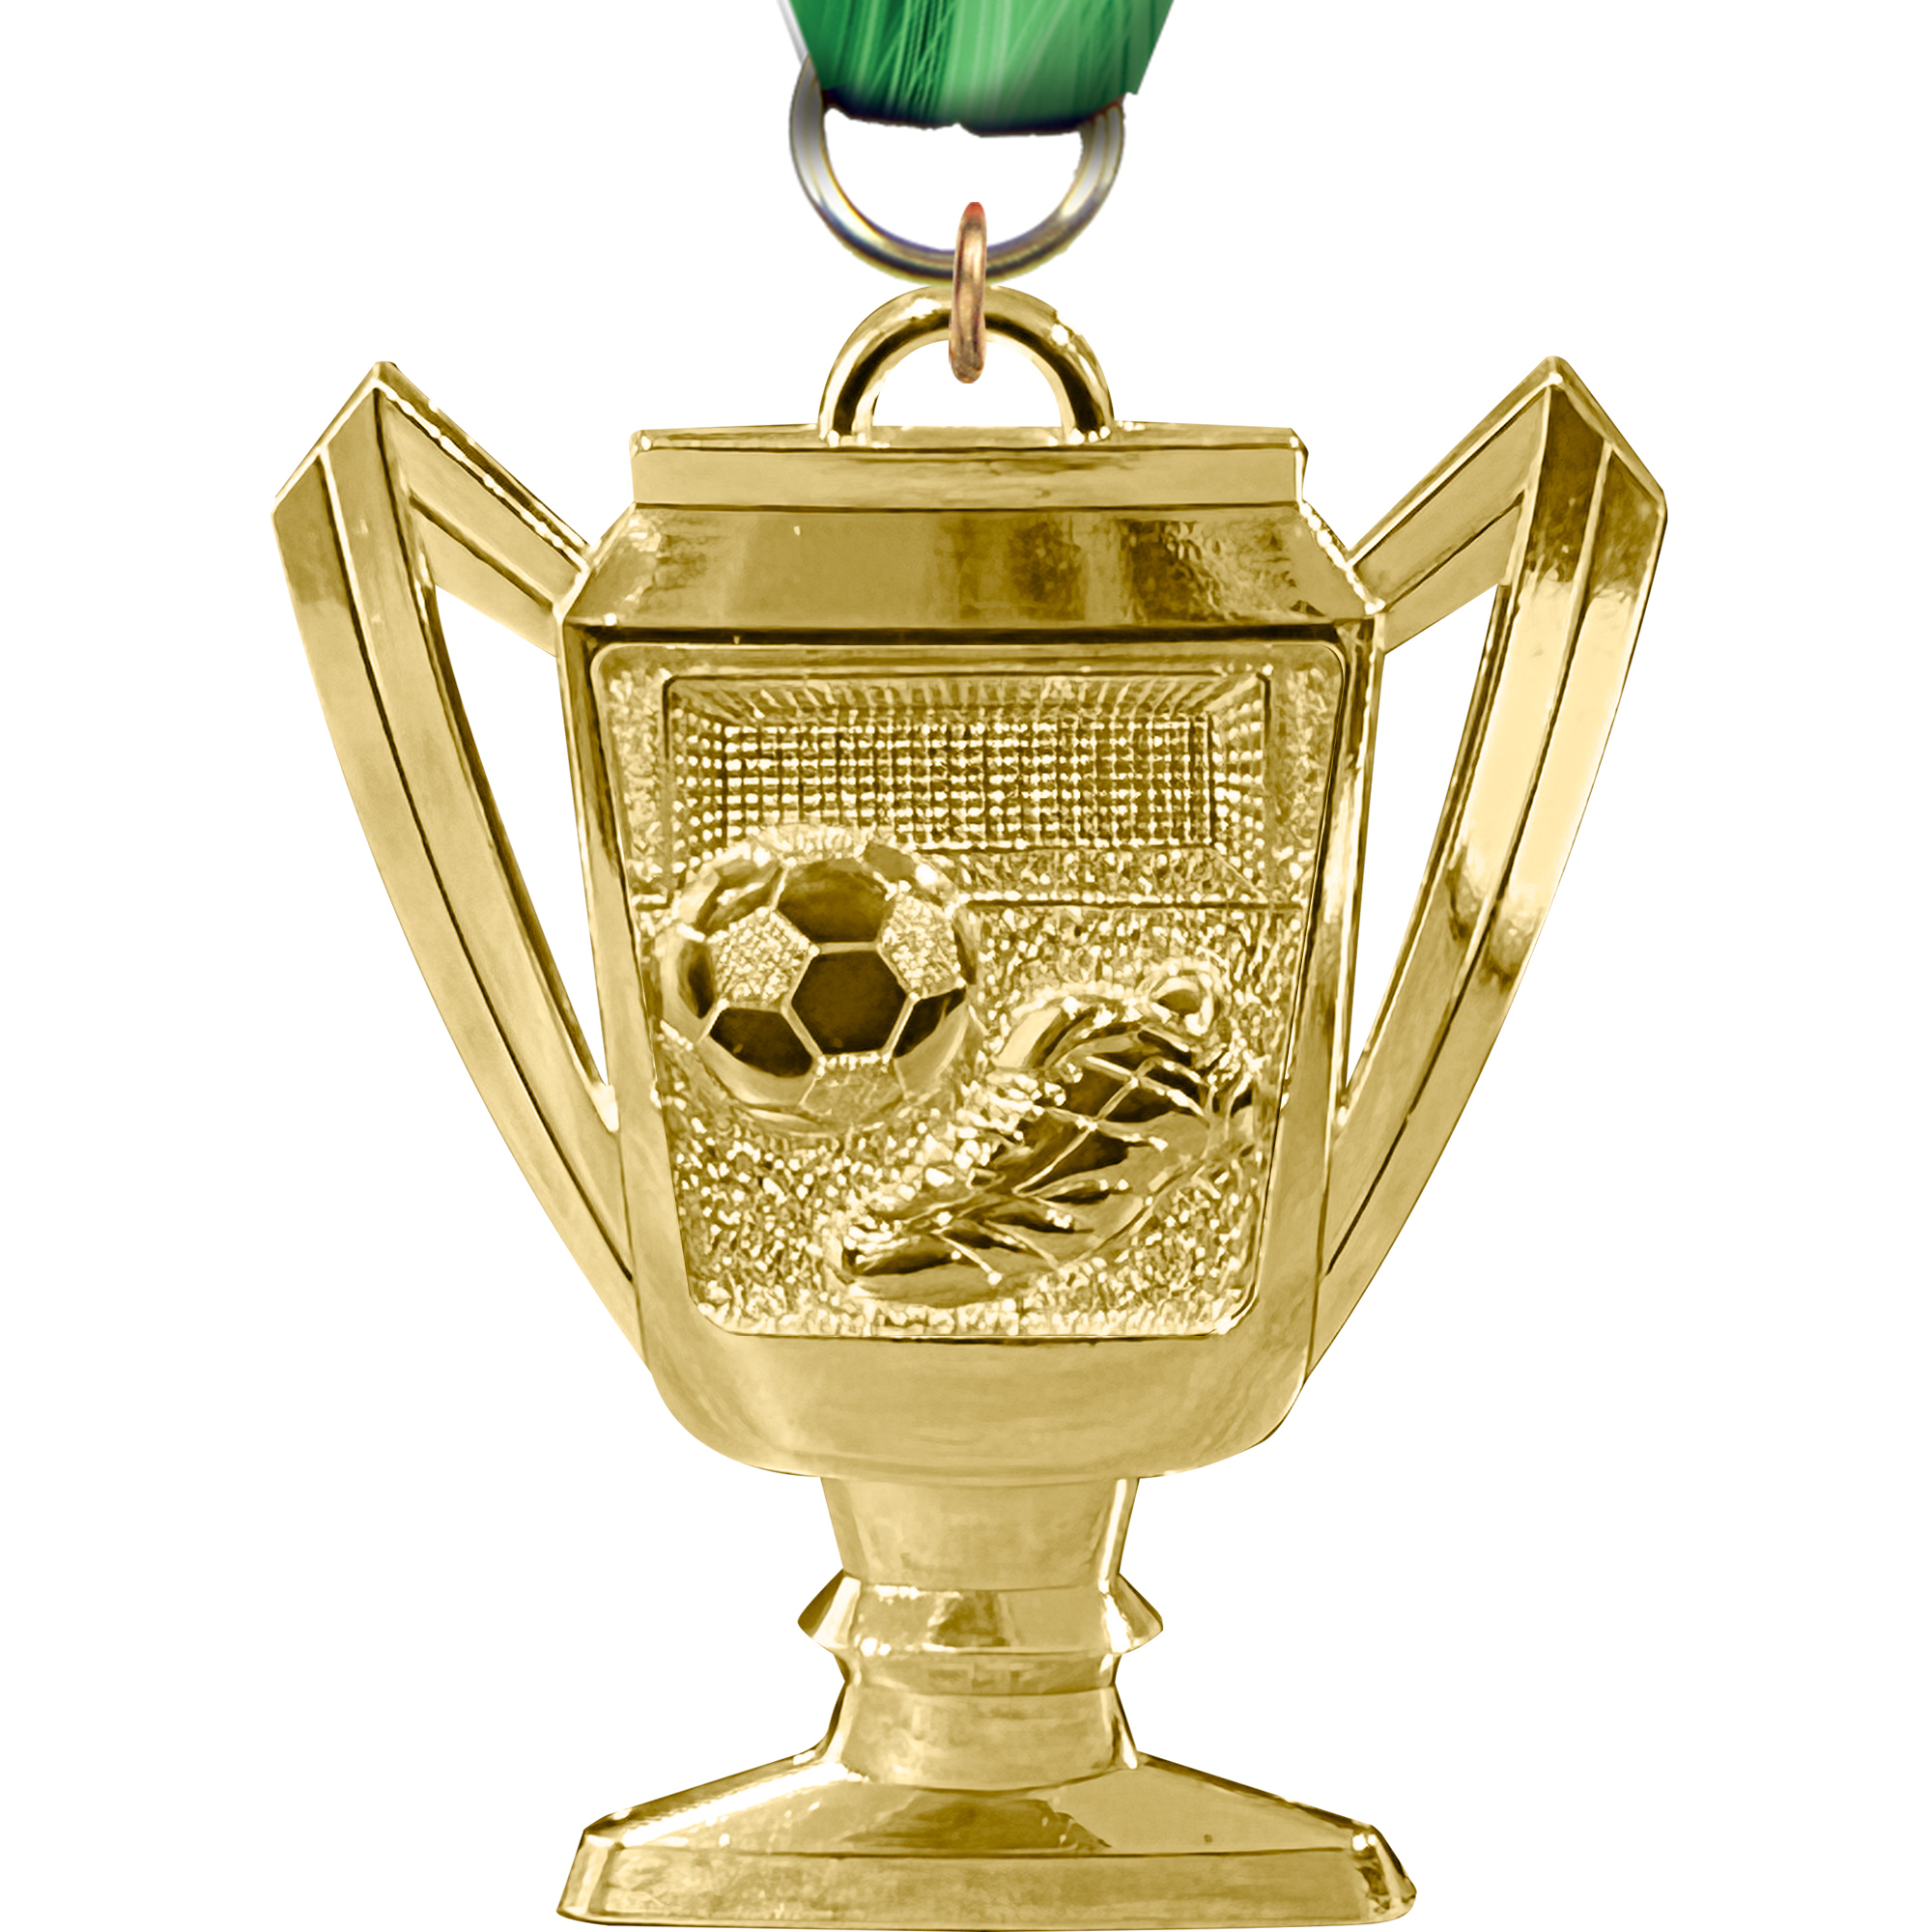 Soccer Bright Gold Trophy Cup Medal